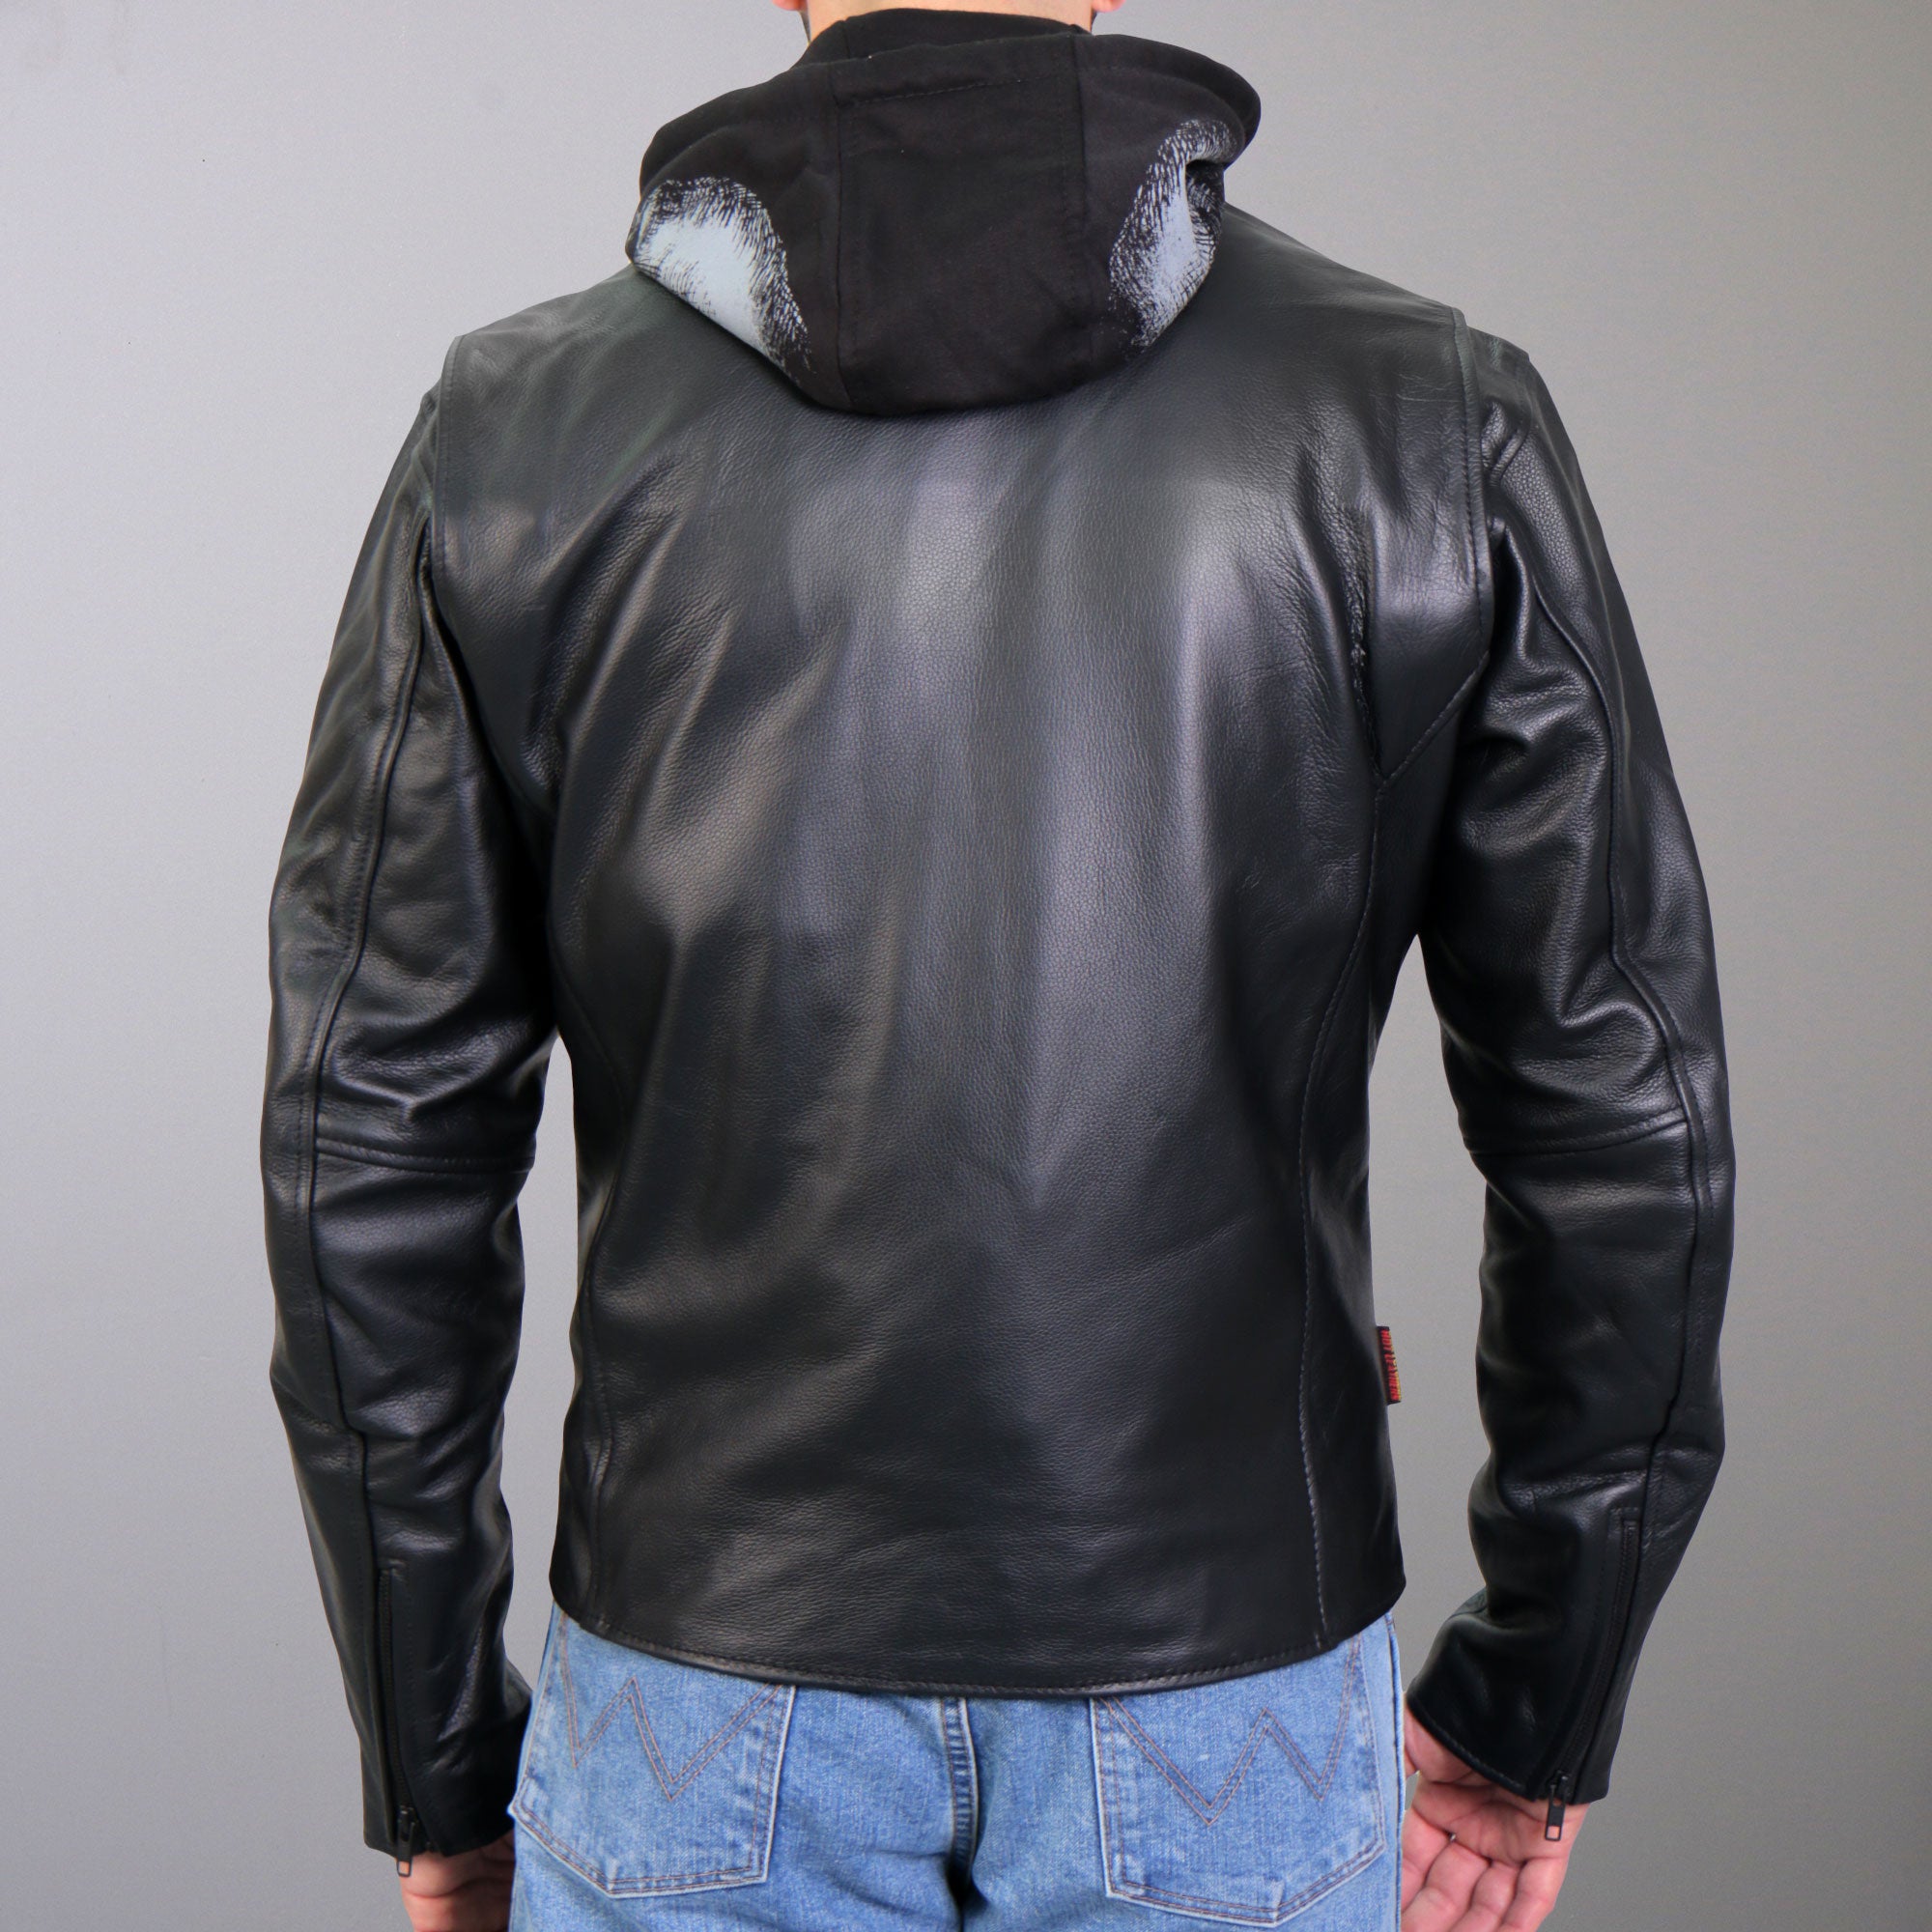 Hot Leathers JKM1031 Men’s Biker  ‘Skull and Bones’ Leather Motorcycle Jacket with Flannel Lining